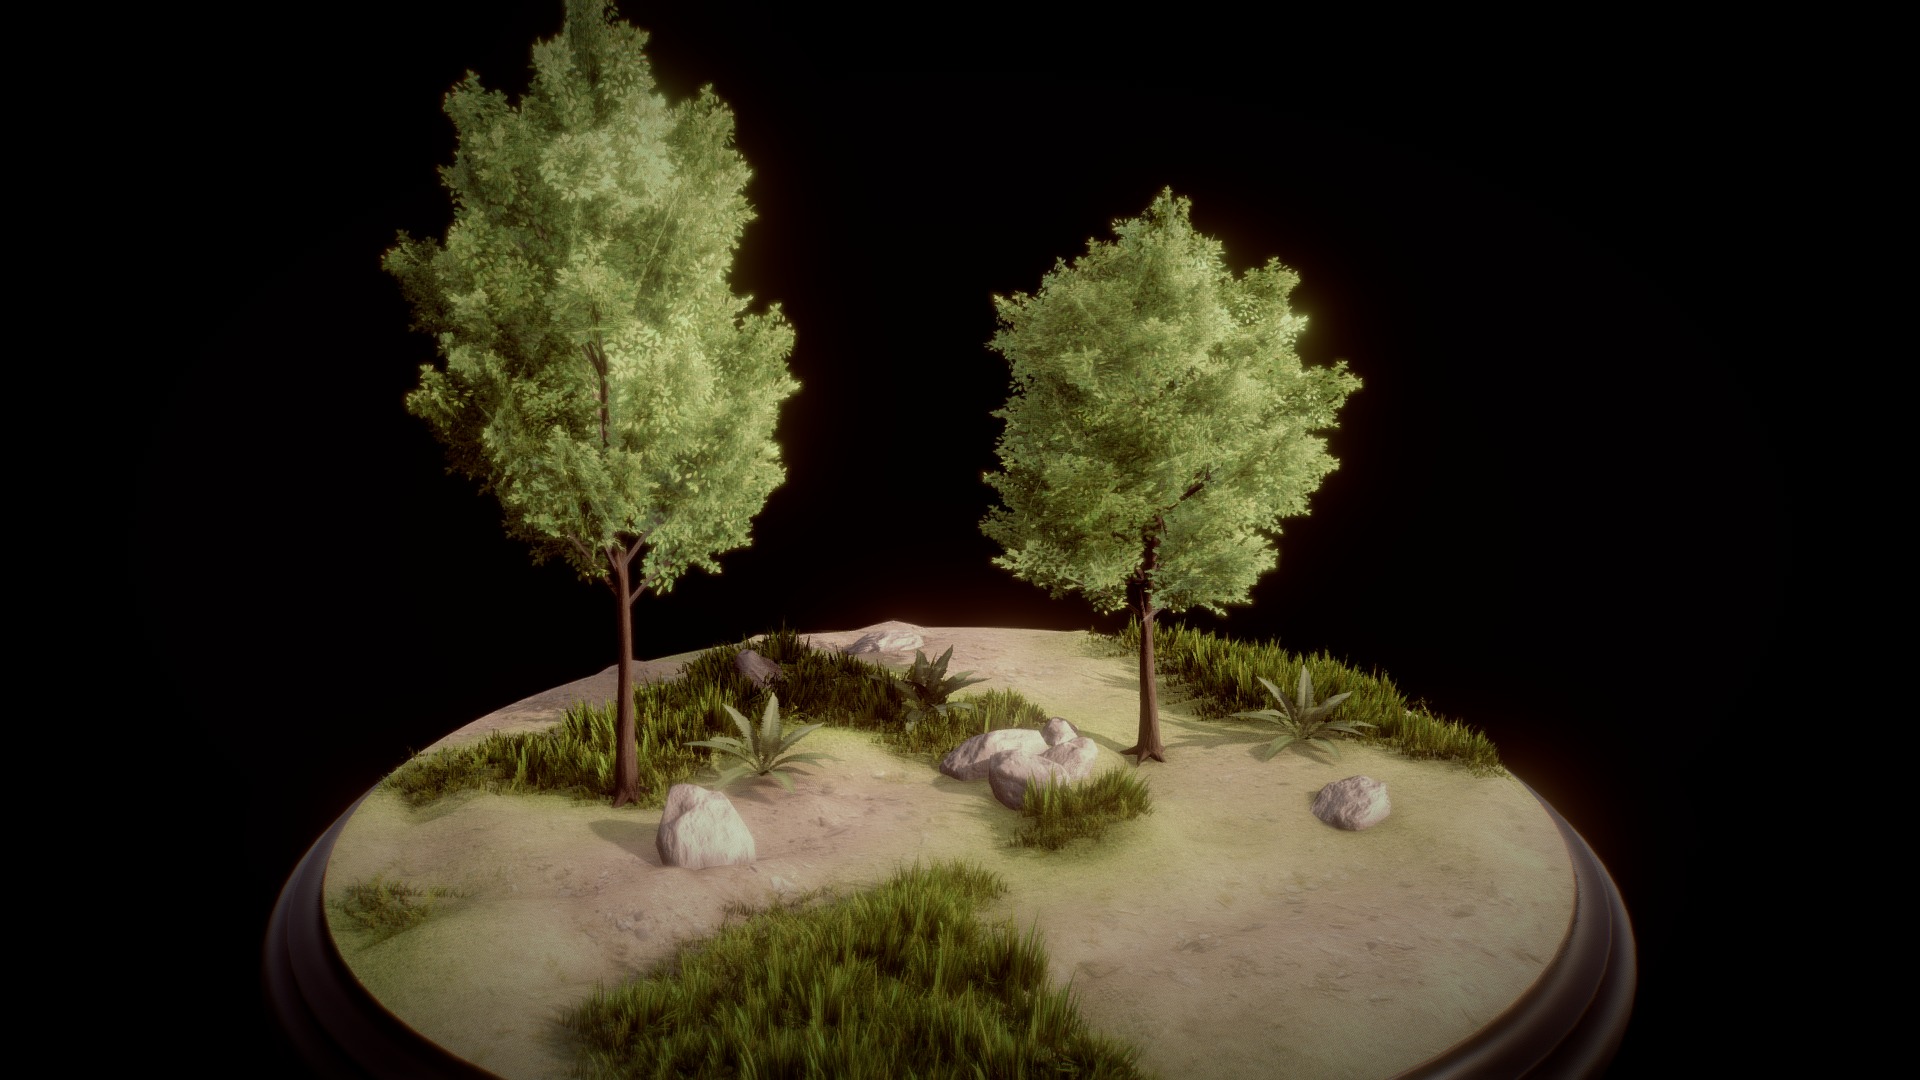 3D model Low Poly diorama - This is a 3D model of the Low Poly diorama. The 3D model is about a dirt path with trees on either side of it.